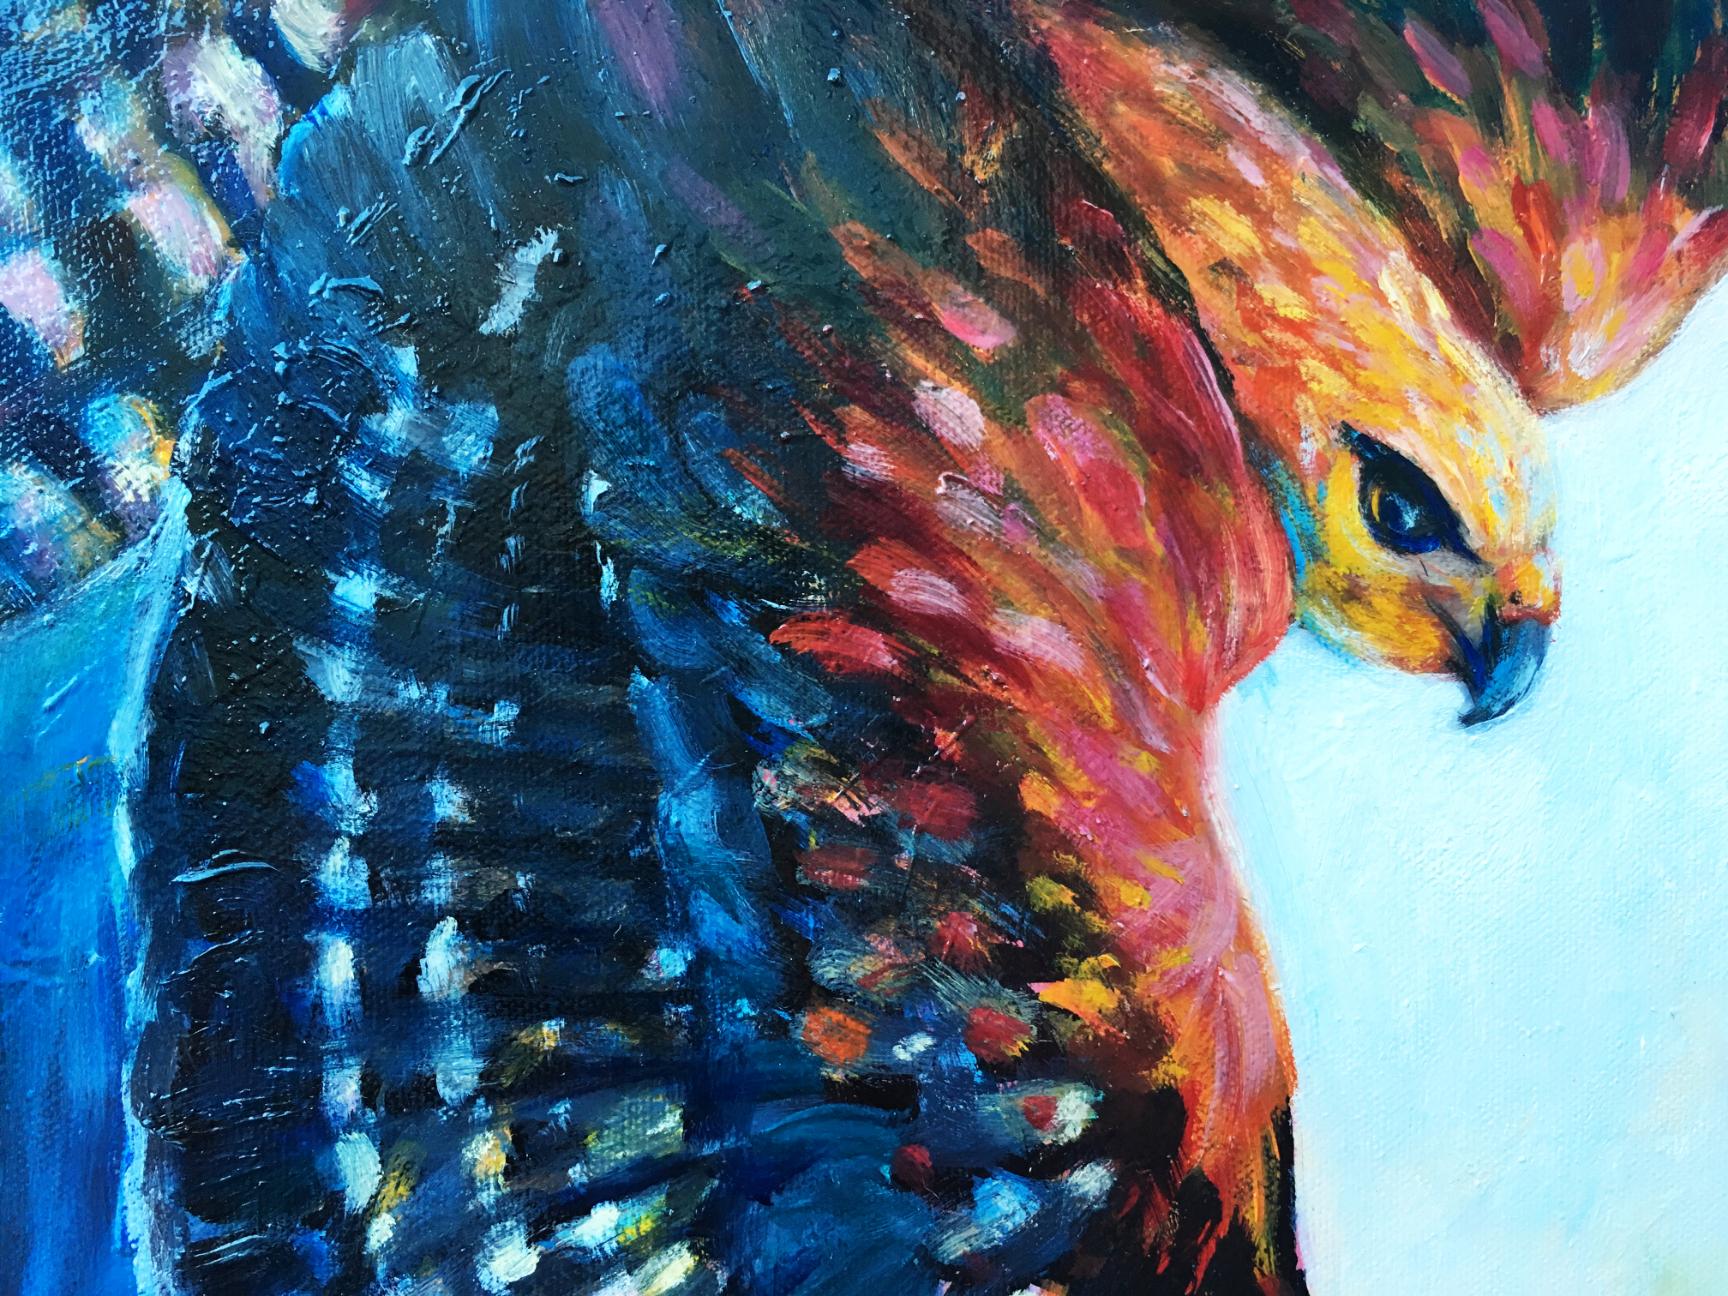 <p>Artist Comments<br />A hawk dives through the sky, the last light of the day glows on its feathers and the trees in the distance. The bird occupies the majority of the composition emphasizing its presence and power. 